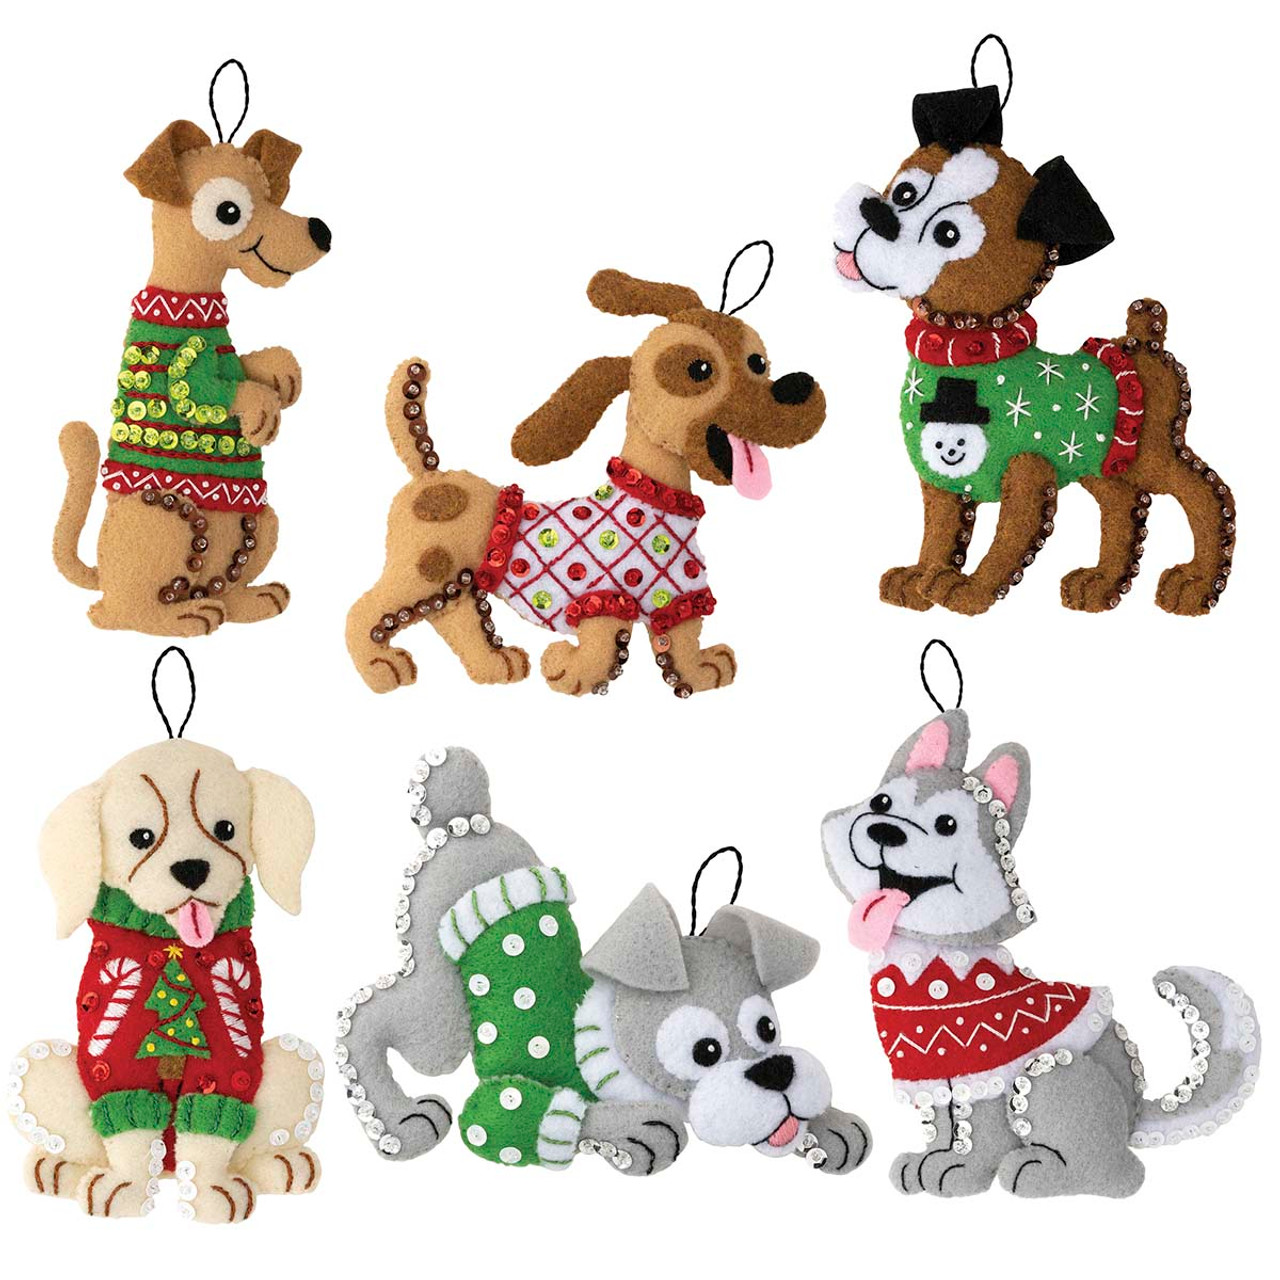 Bucilla Felt Ornaments Applique Kit Set of 6 - Dogs in Ugly Sweaters